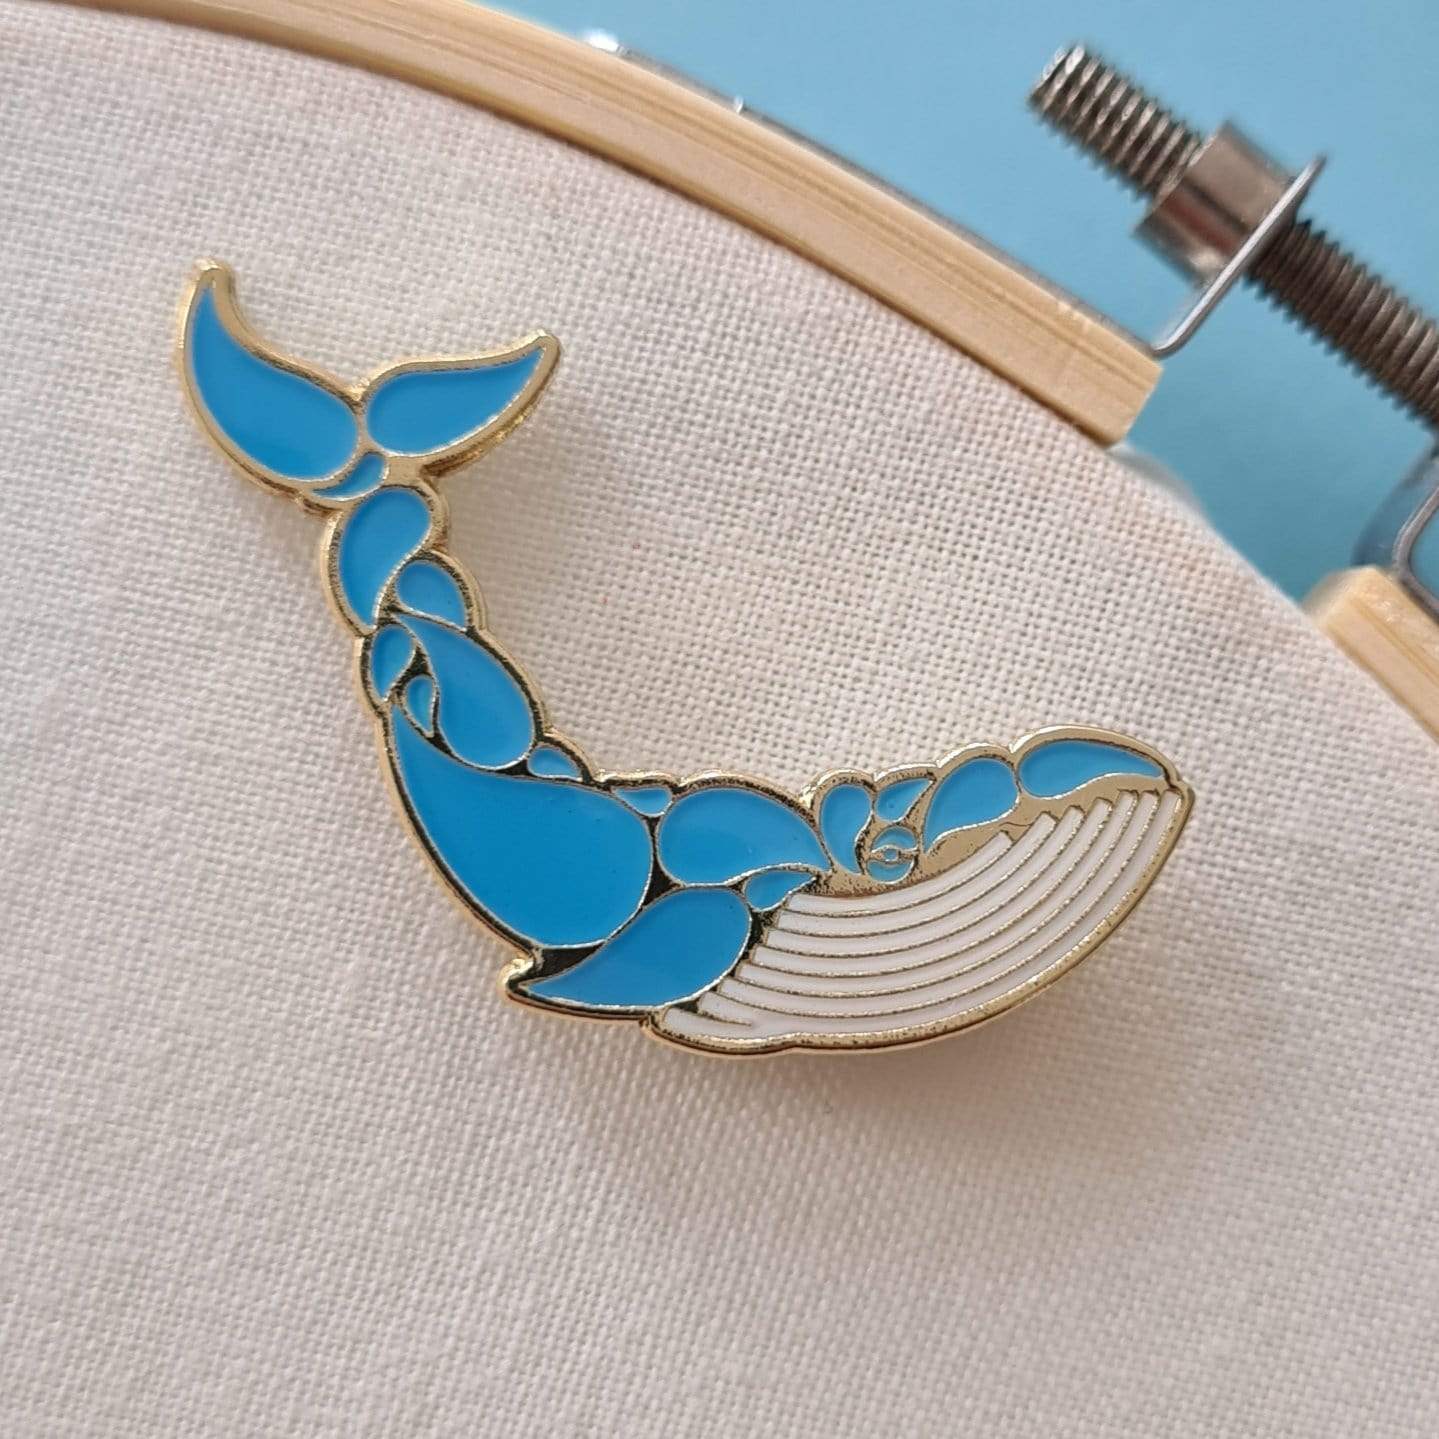 Paraffle Embroidery Supplies & Accessories Whale Magnetic Needle Minder